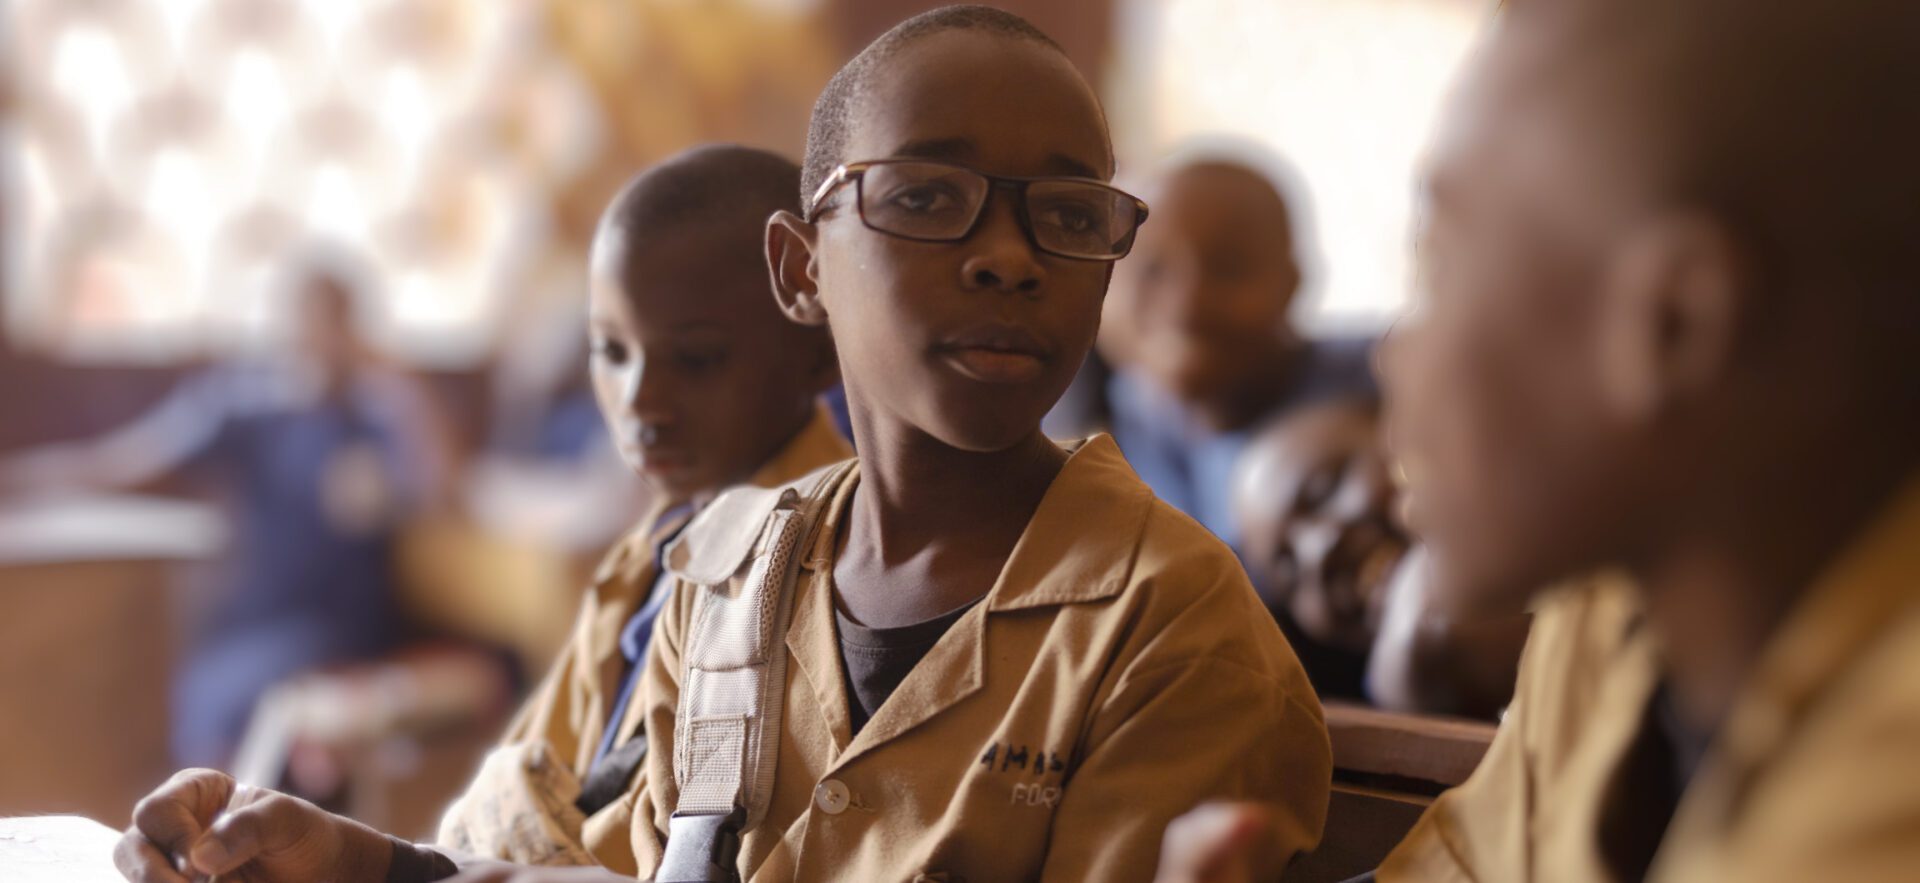 A boy with dark skin and glasses sits at a desk in a classroom surrounded by peers. He is turned toward the camera.